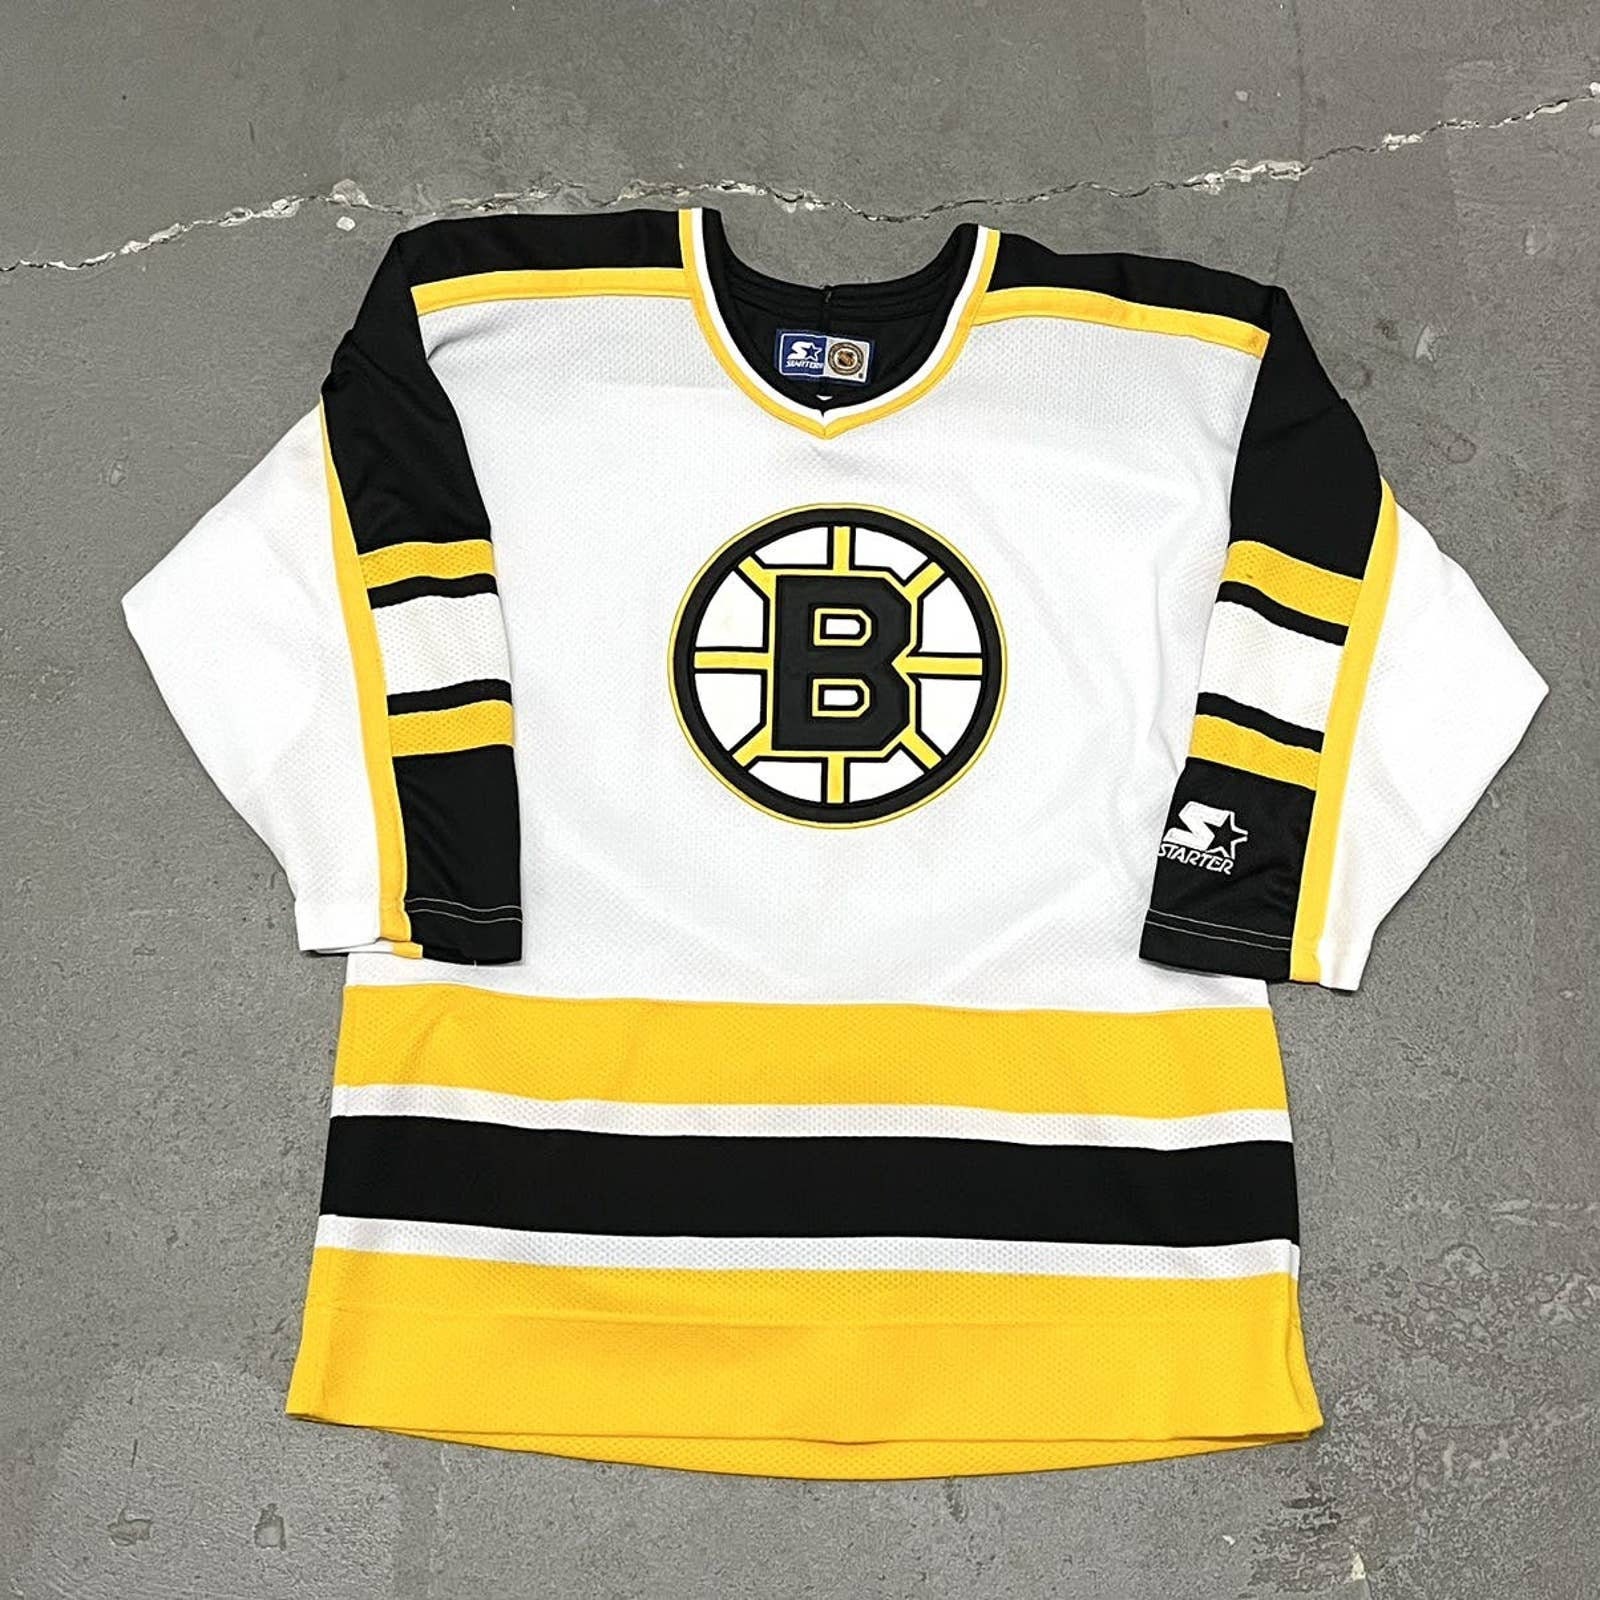 Boston Bruins #8 Cam Neely Yellow Jersey on sale,for Cheap